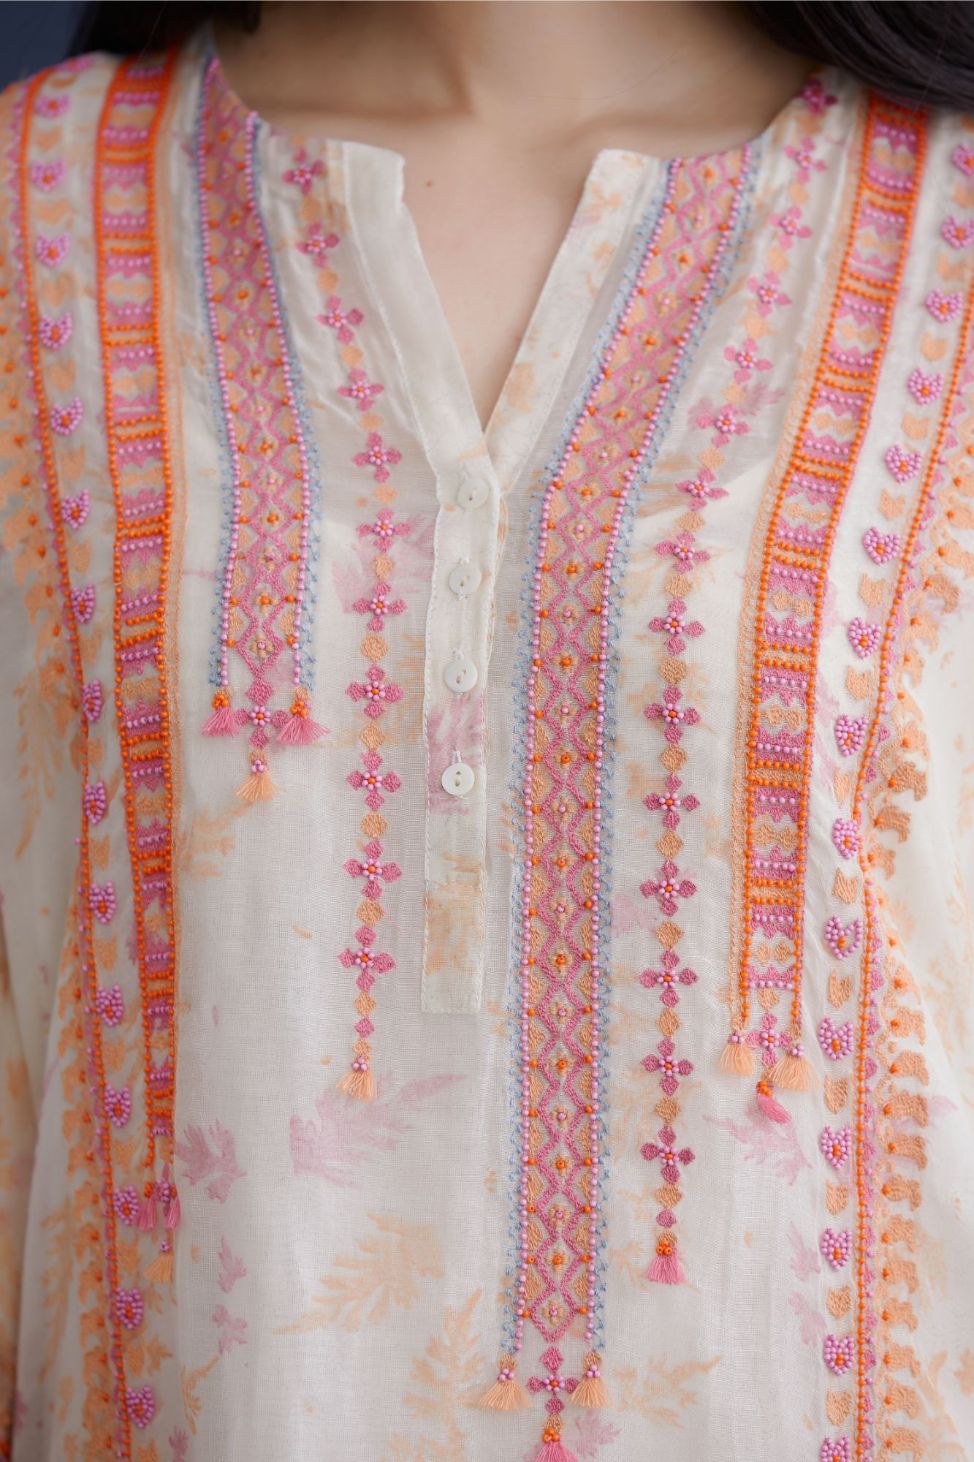 Off white hand block printed short kurta set, highlighted with delicate bead and thread embroidery